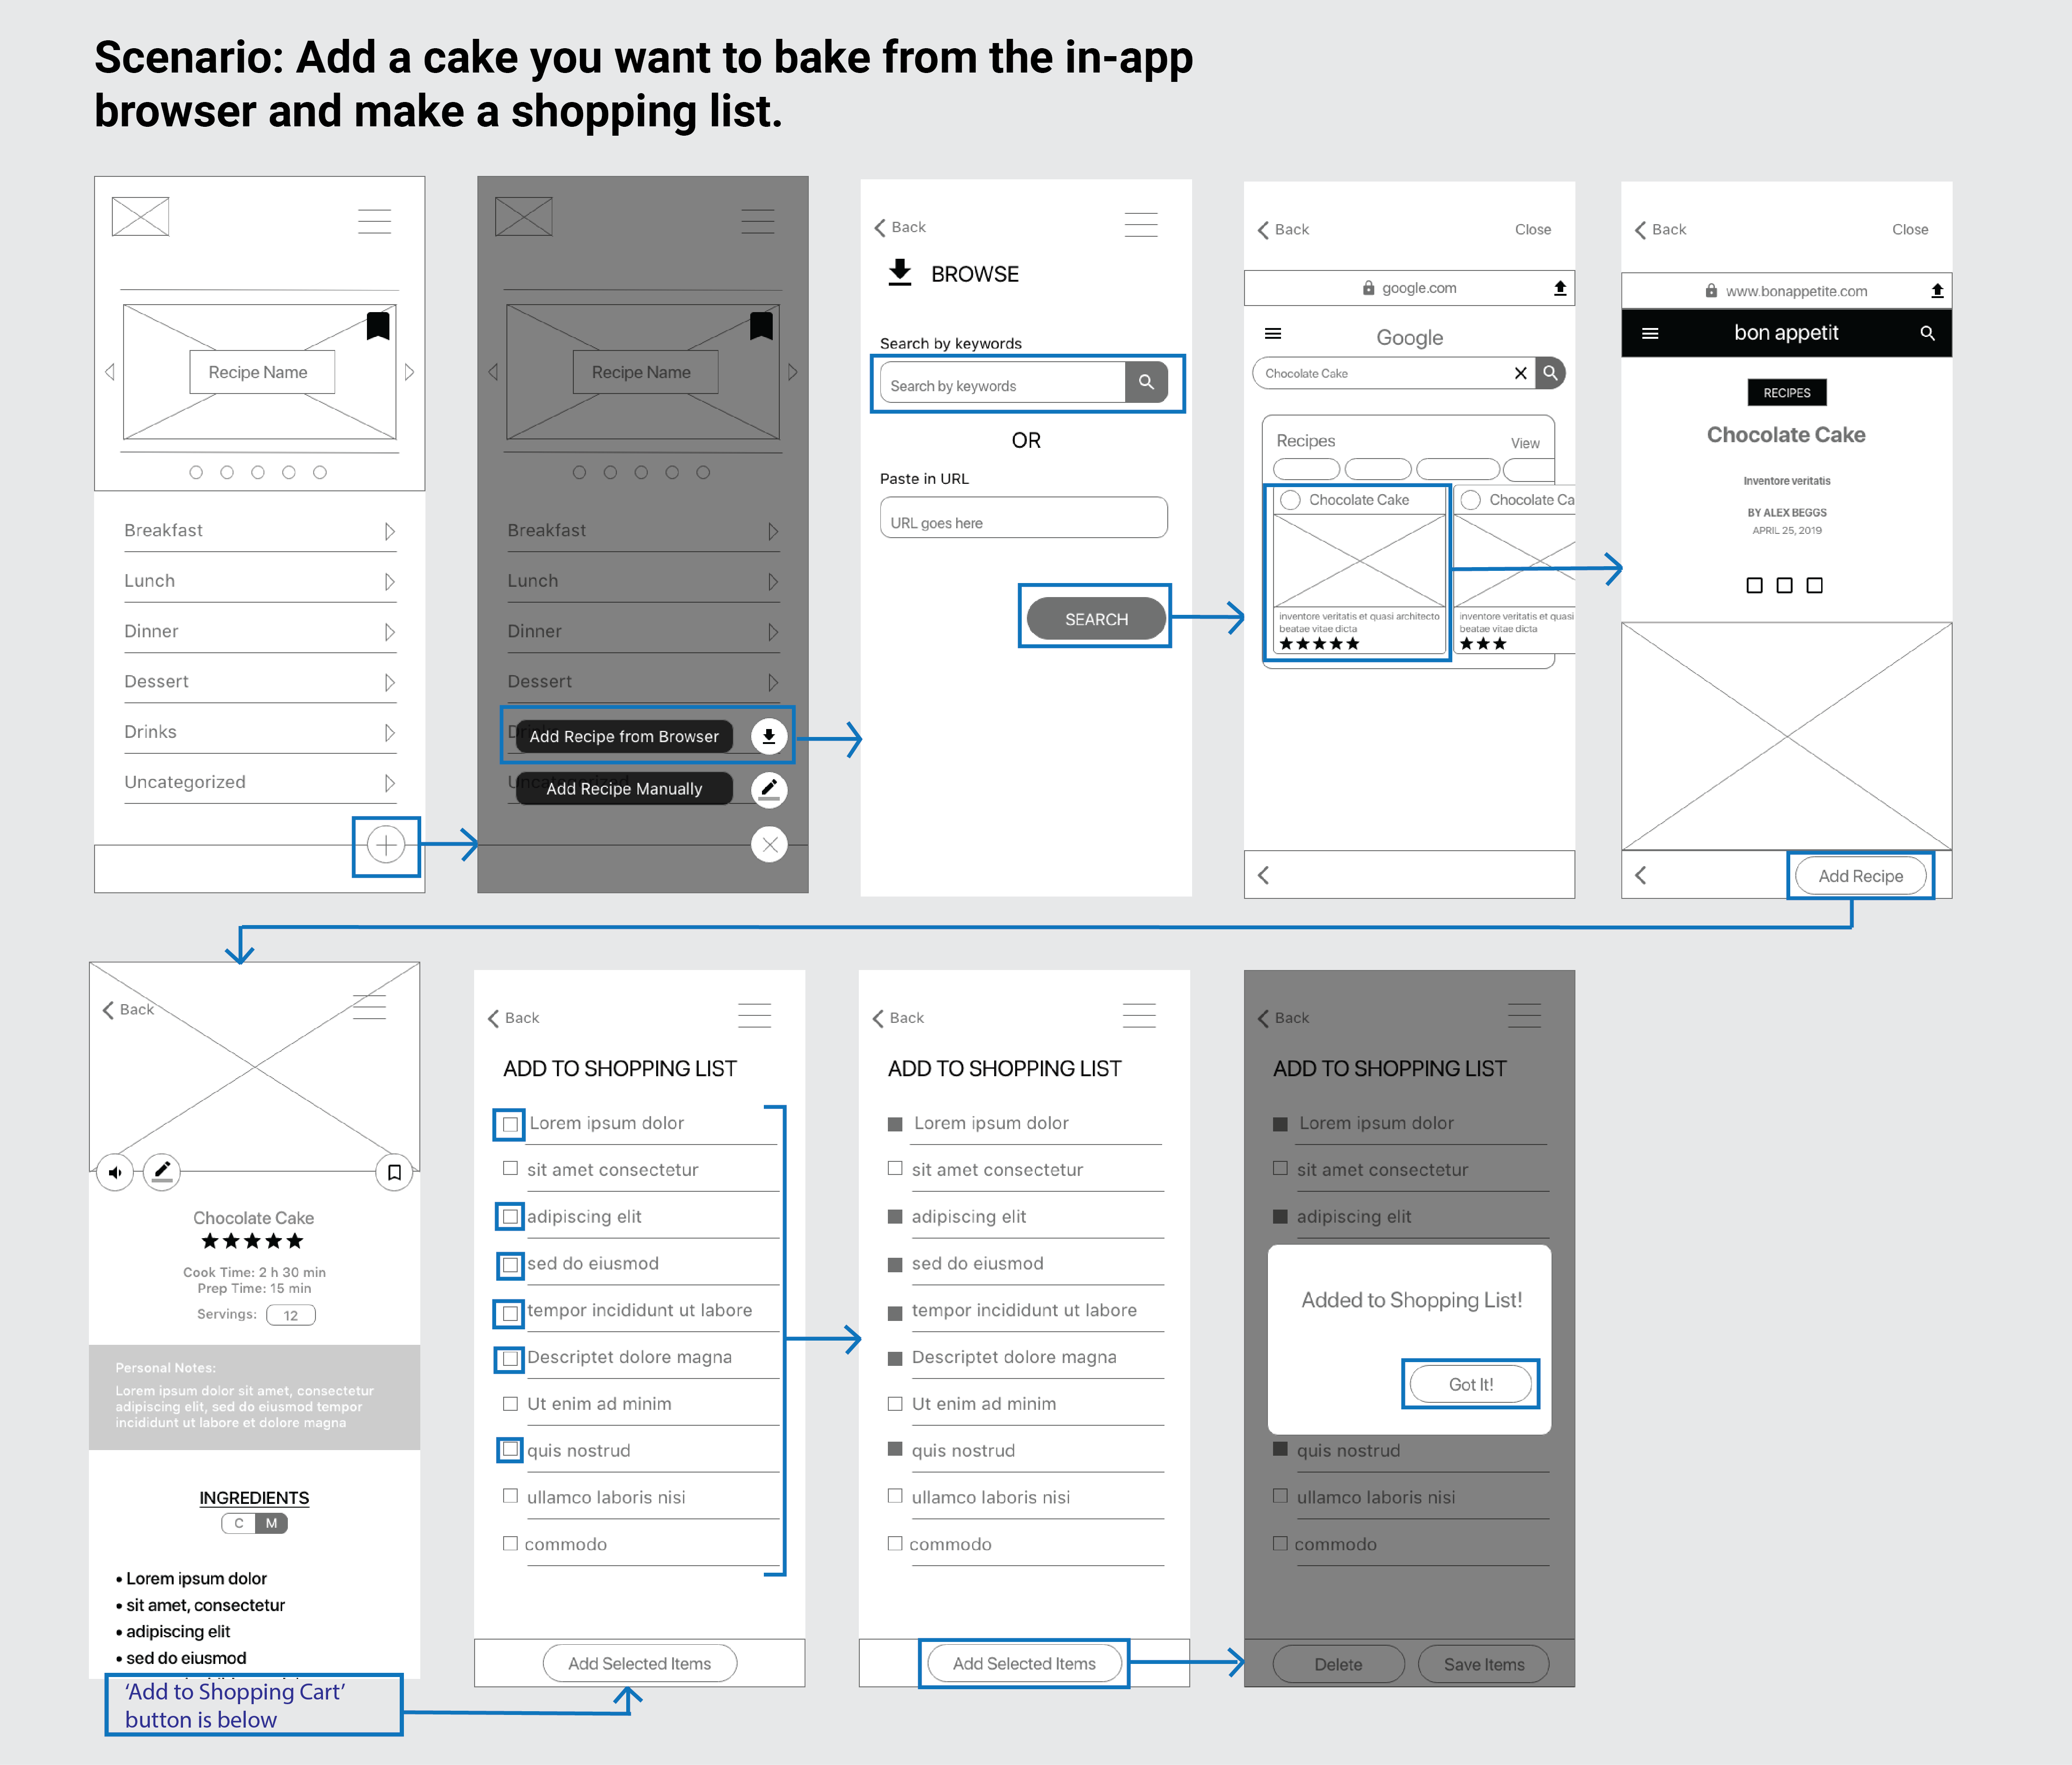 Wireframe Flow 1: Add a cake you want to bake from the in-app browser and make a shopping list.